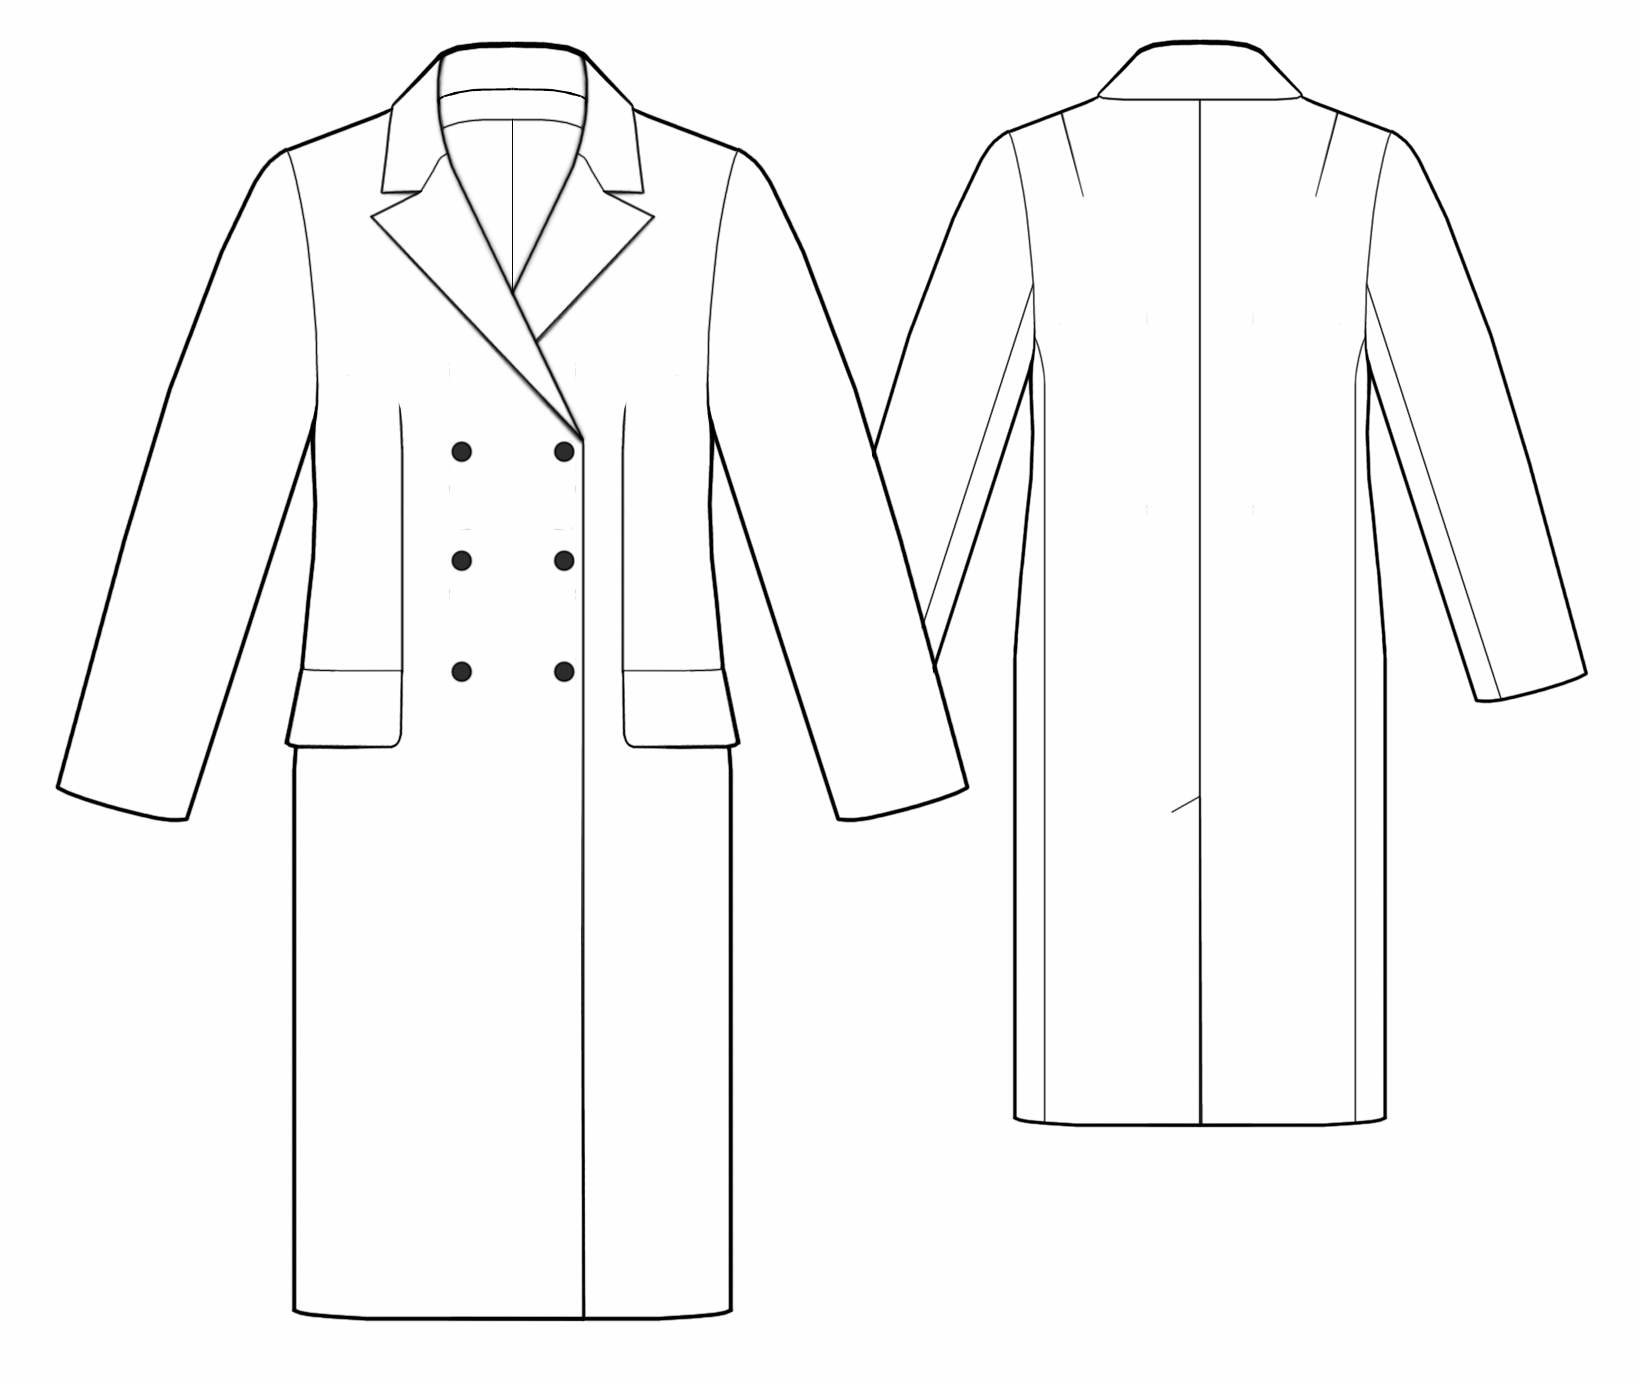 Coat Dress - Sewing Pattern #5511. Made-to-measure sewing pattern from ...